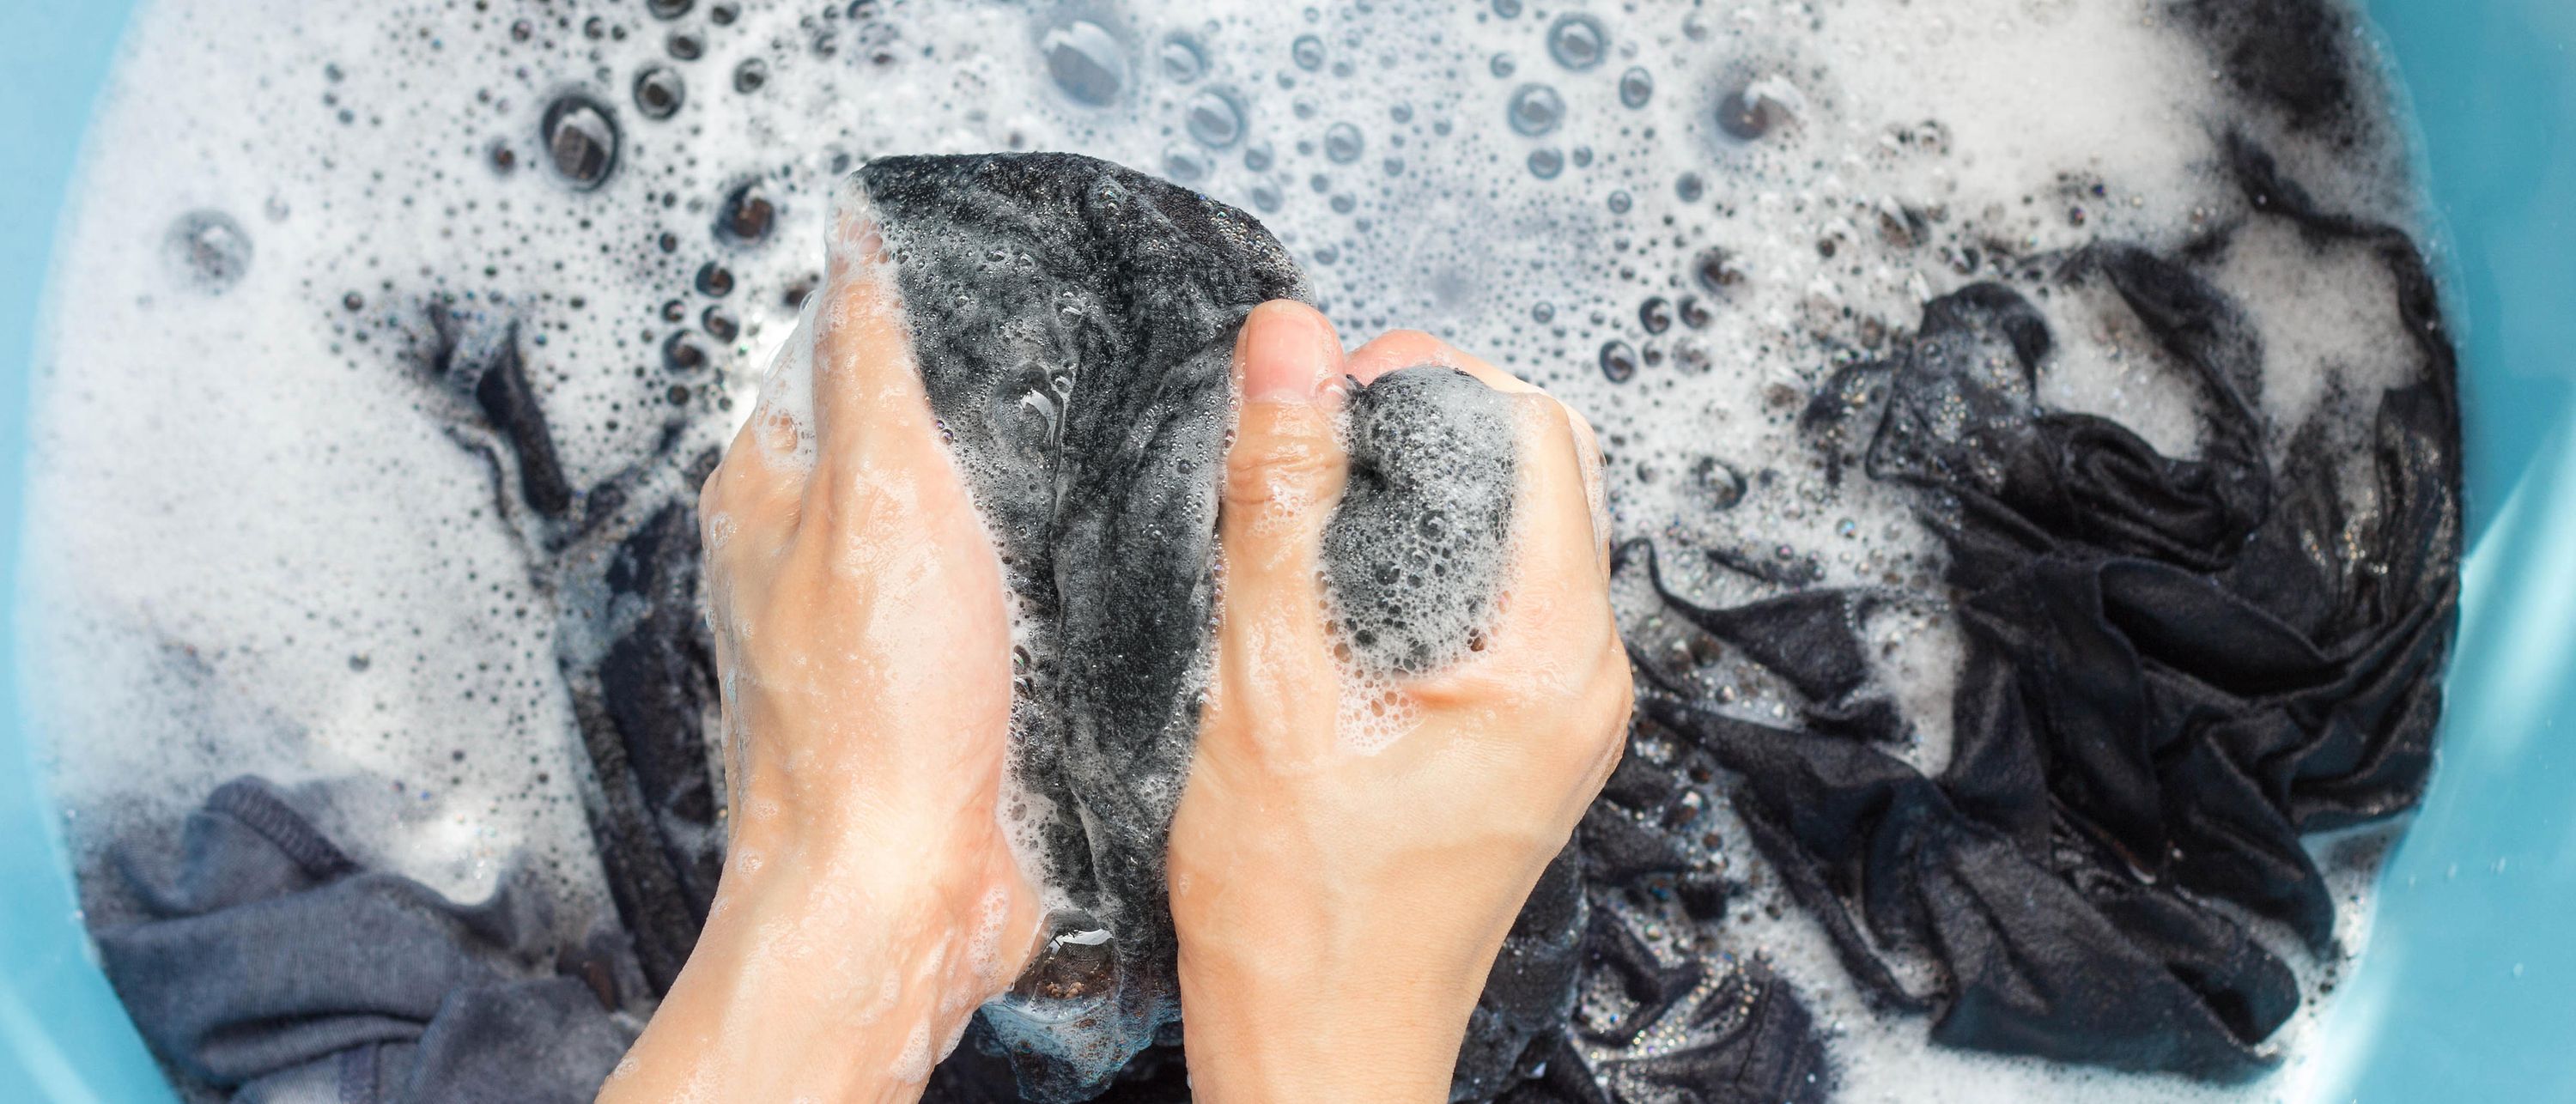 hands washing fabric in plastic bowl